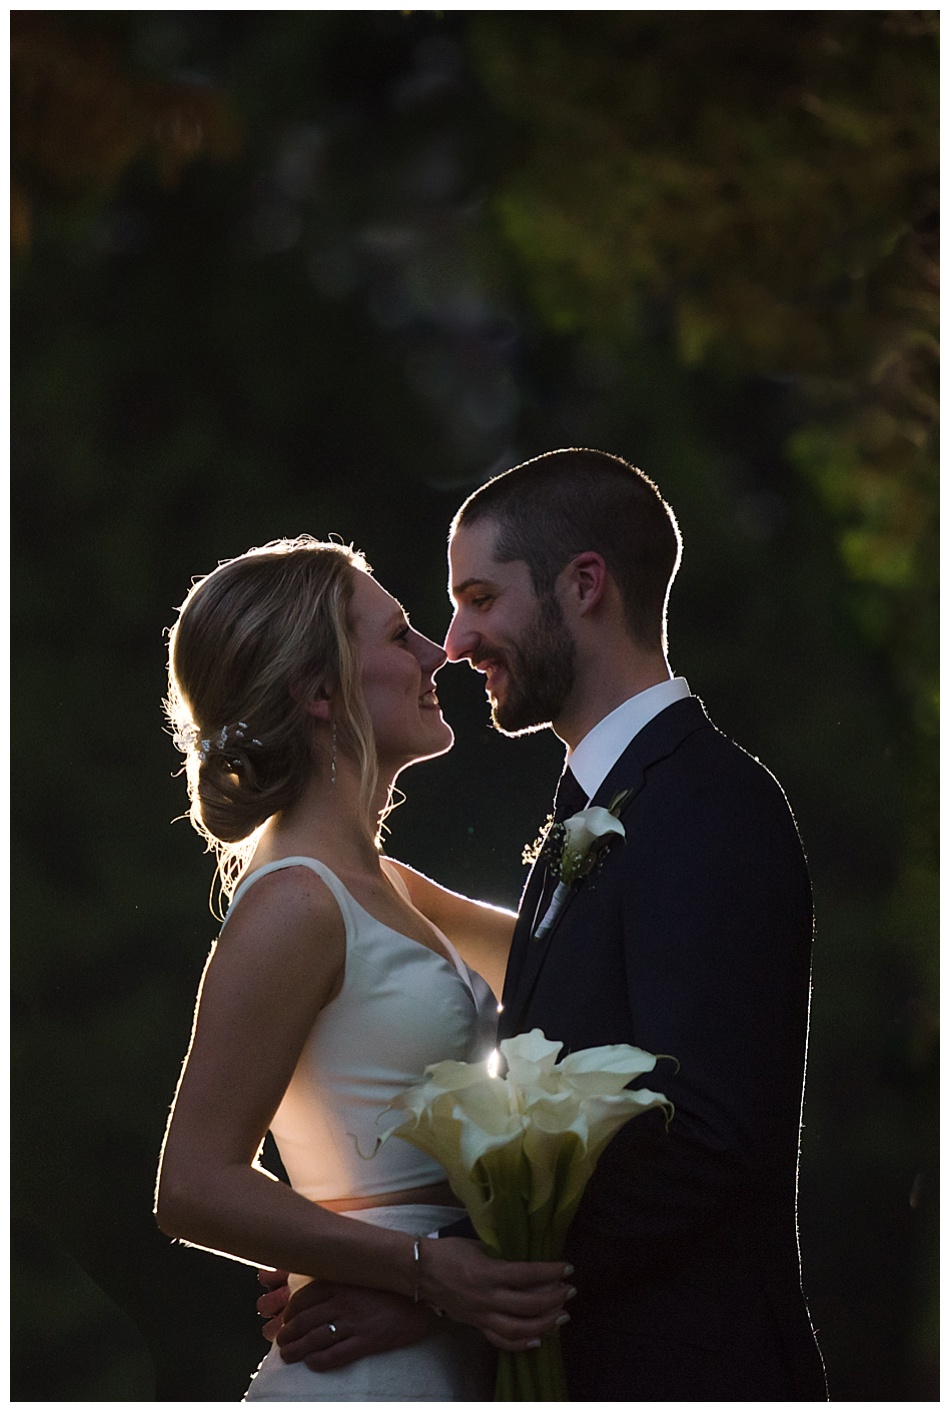 Nighttime portrait of bride and groom at Marietta Hotel and Conference Center